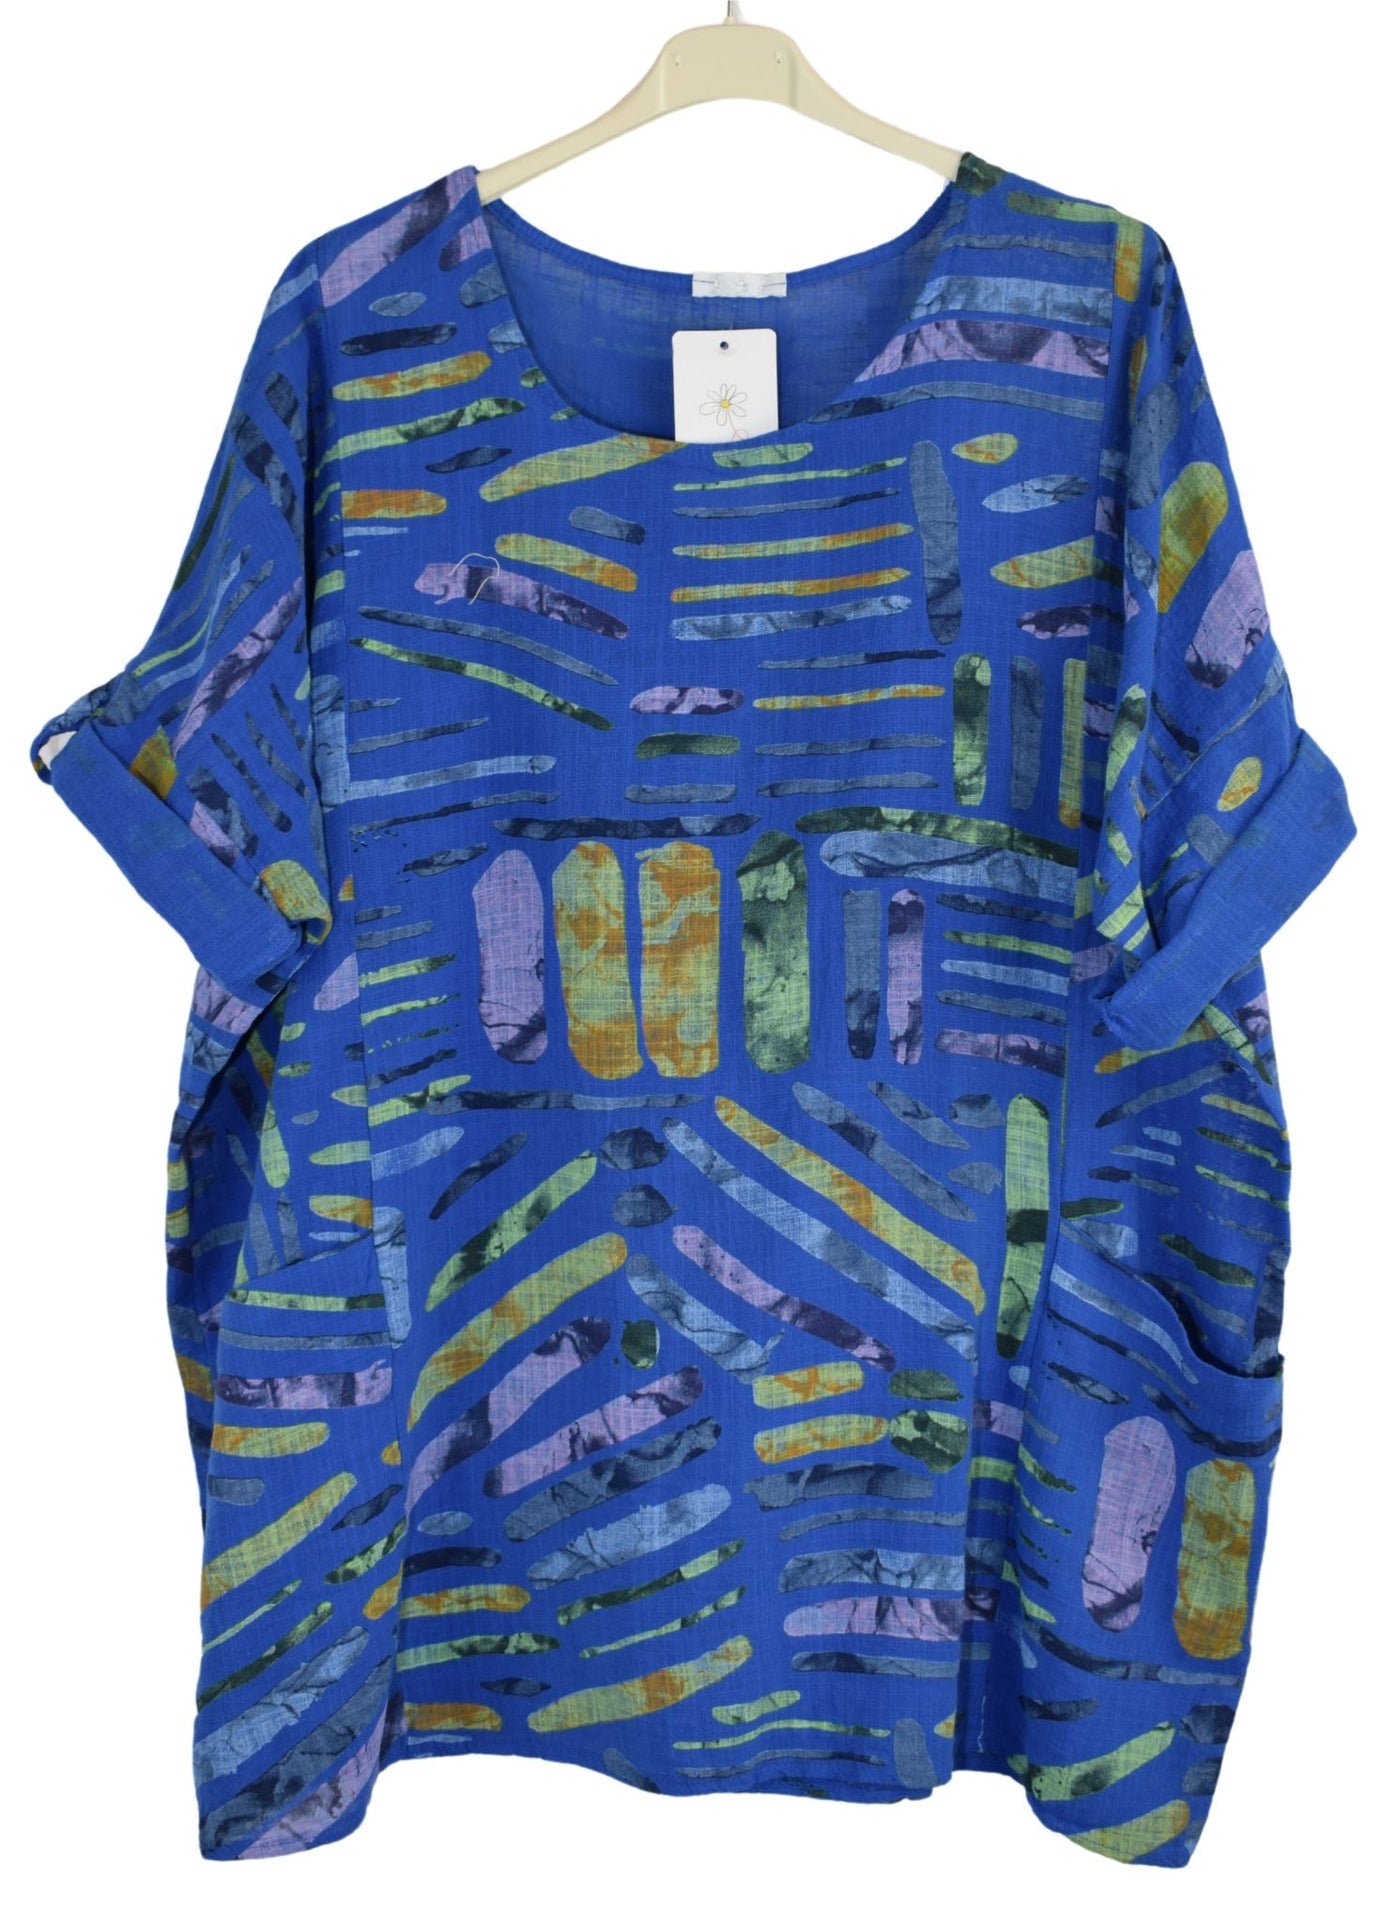 Quirky Colourful Line Print Oversized Cotton Top Casual Summer Top With Pockets